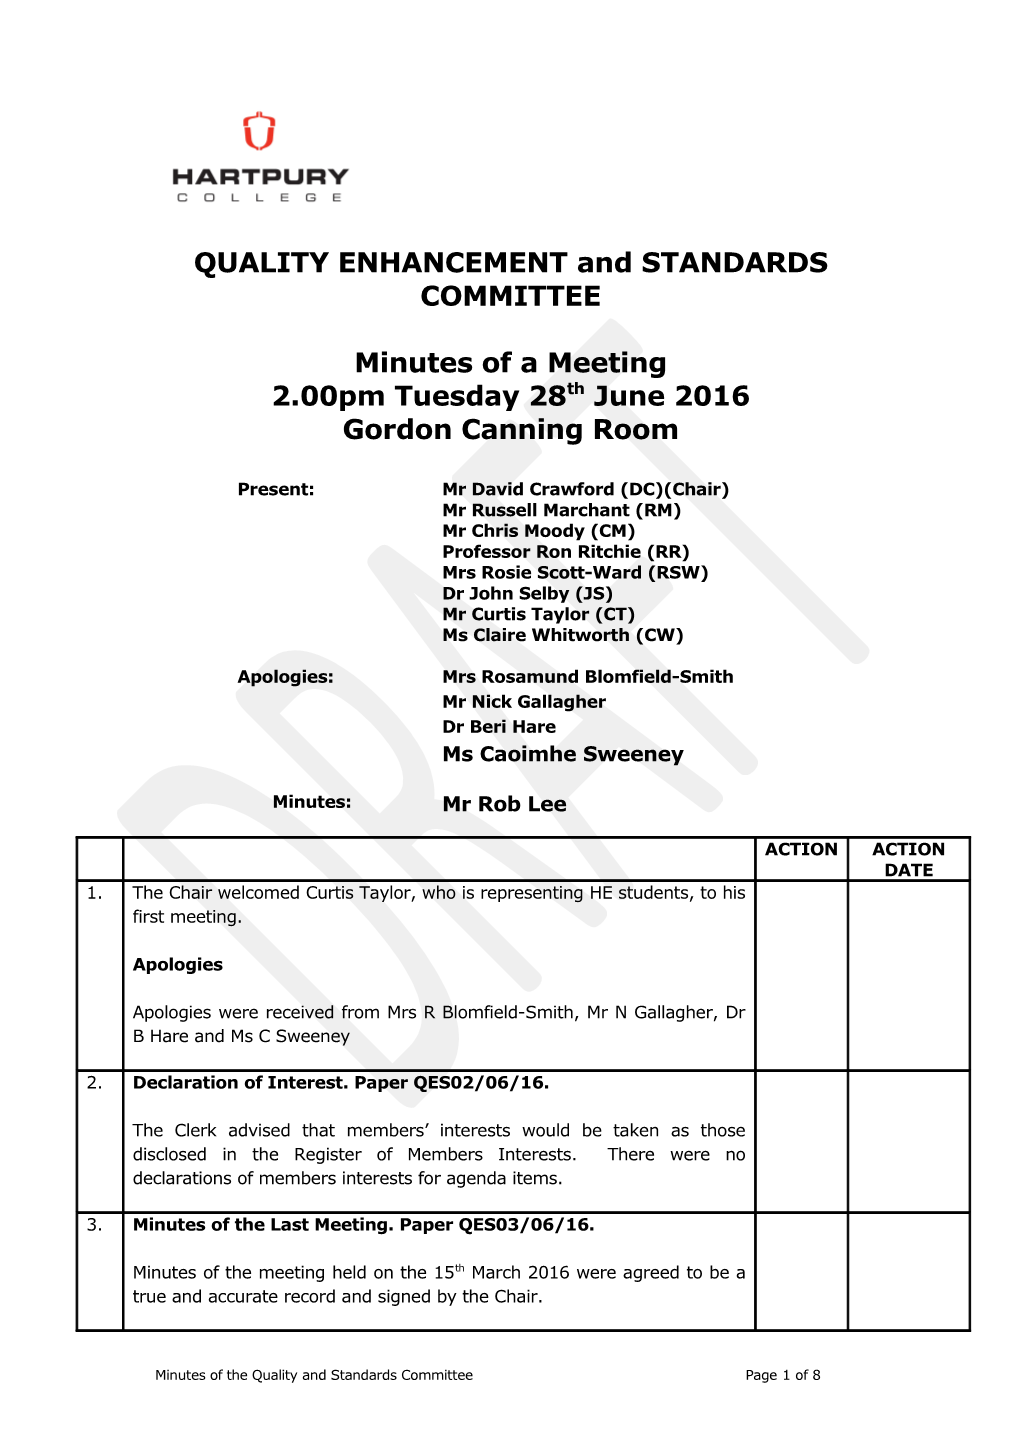 QUALITY ENHANCEMENT and STANDARDS COMMITTEE s1